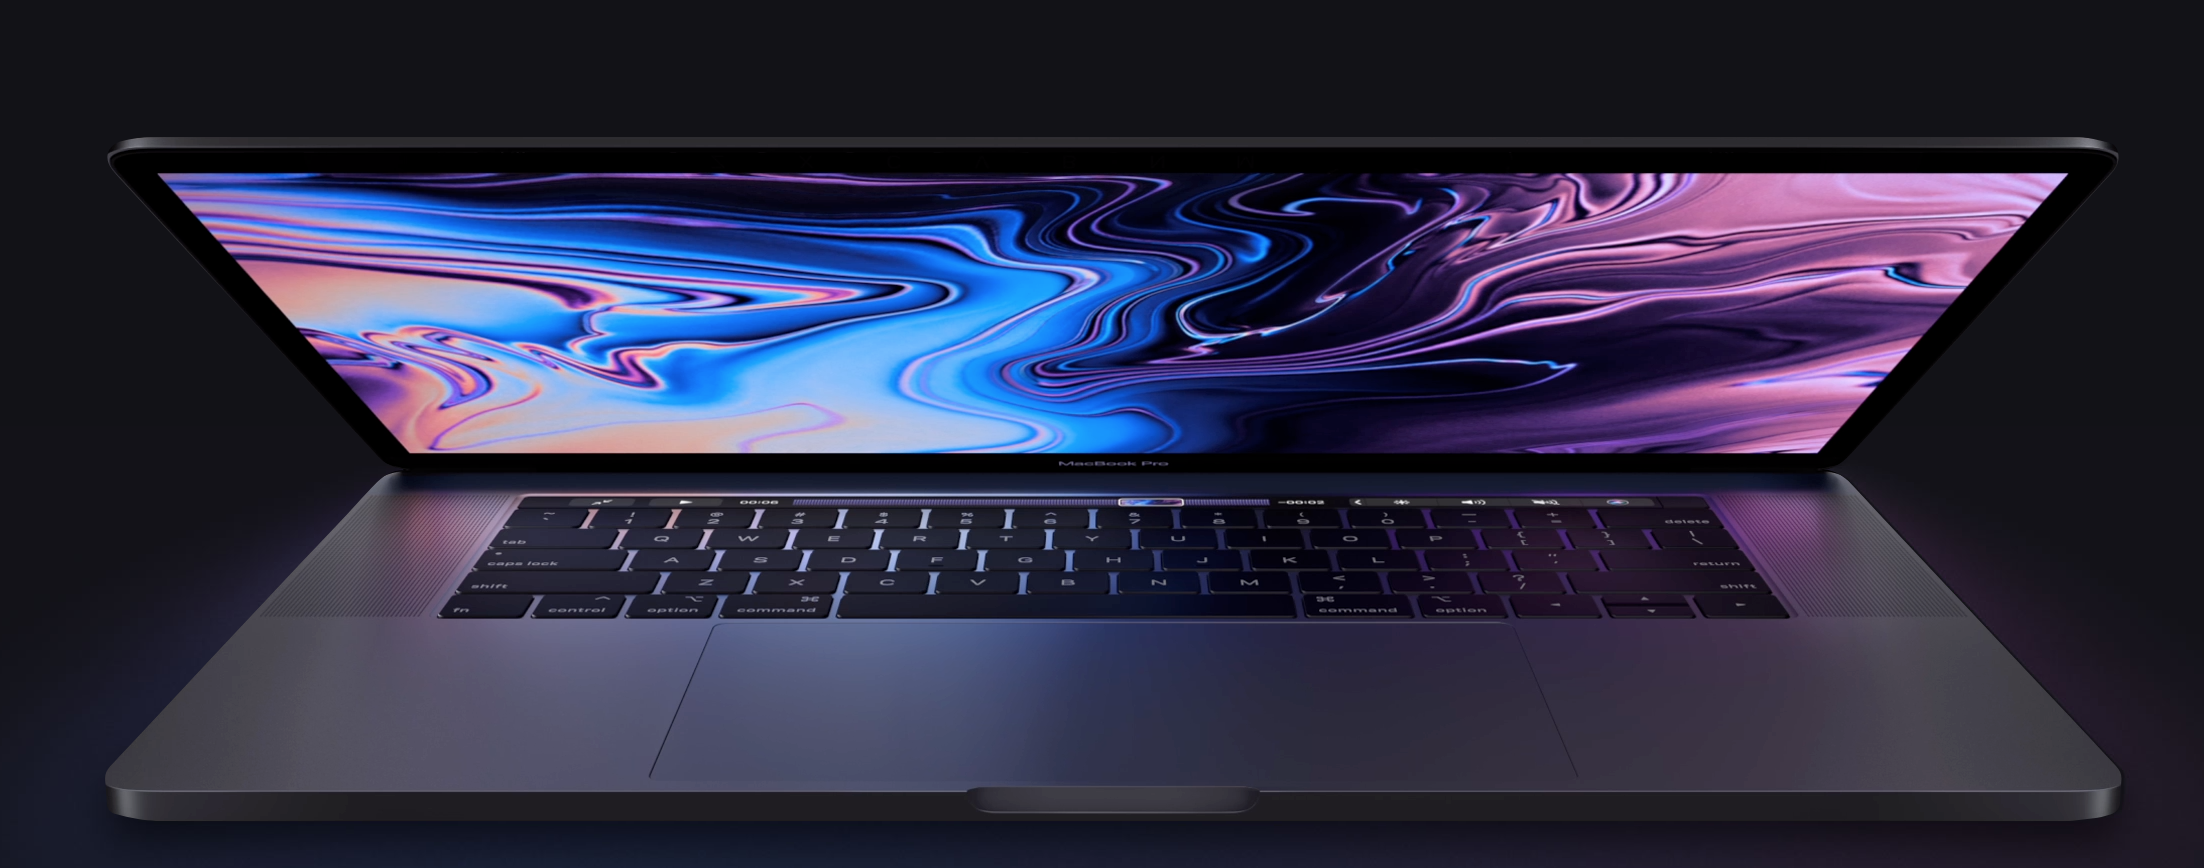 MacBook Pro 15in Touch Bar MR932 Space Grey- 2018.png